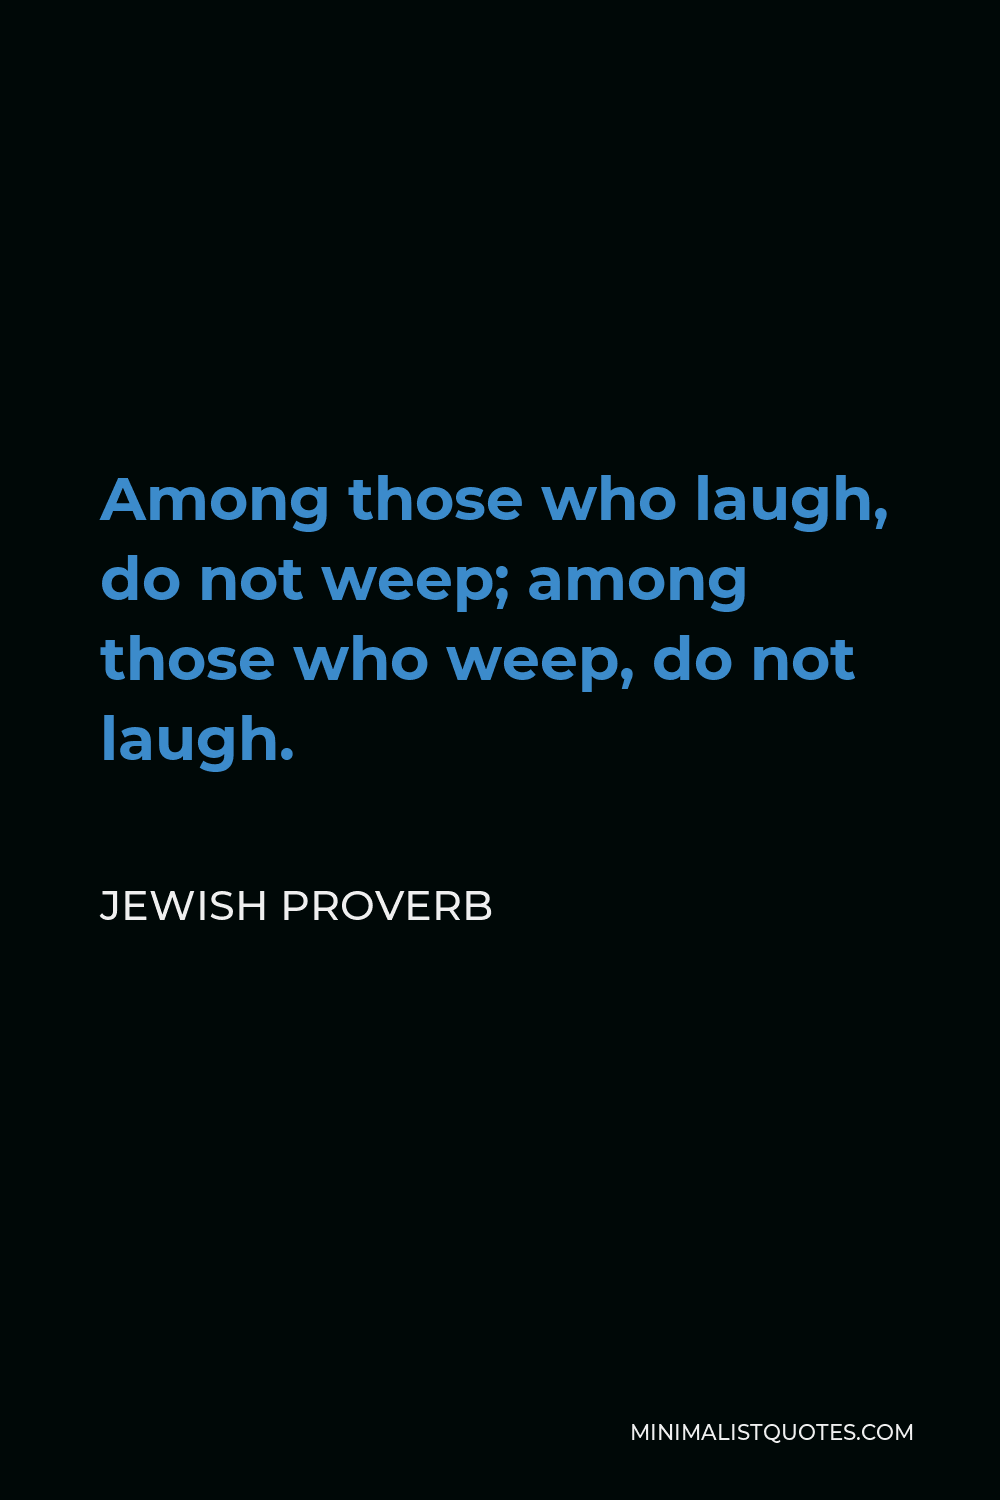 Jewish Proverb Quote - Among those who laugh, do not weep; among those who weep, do not laugh.